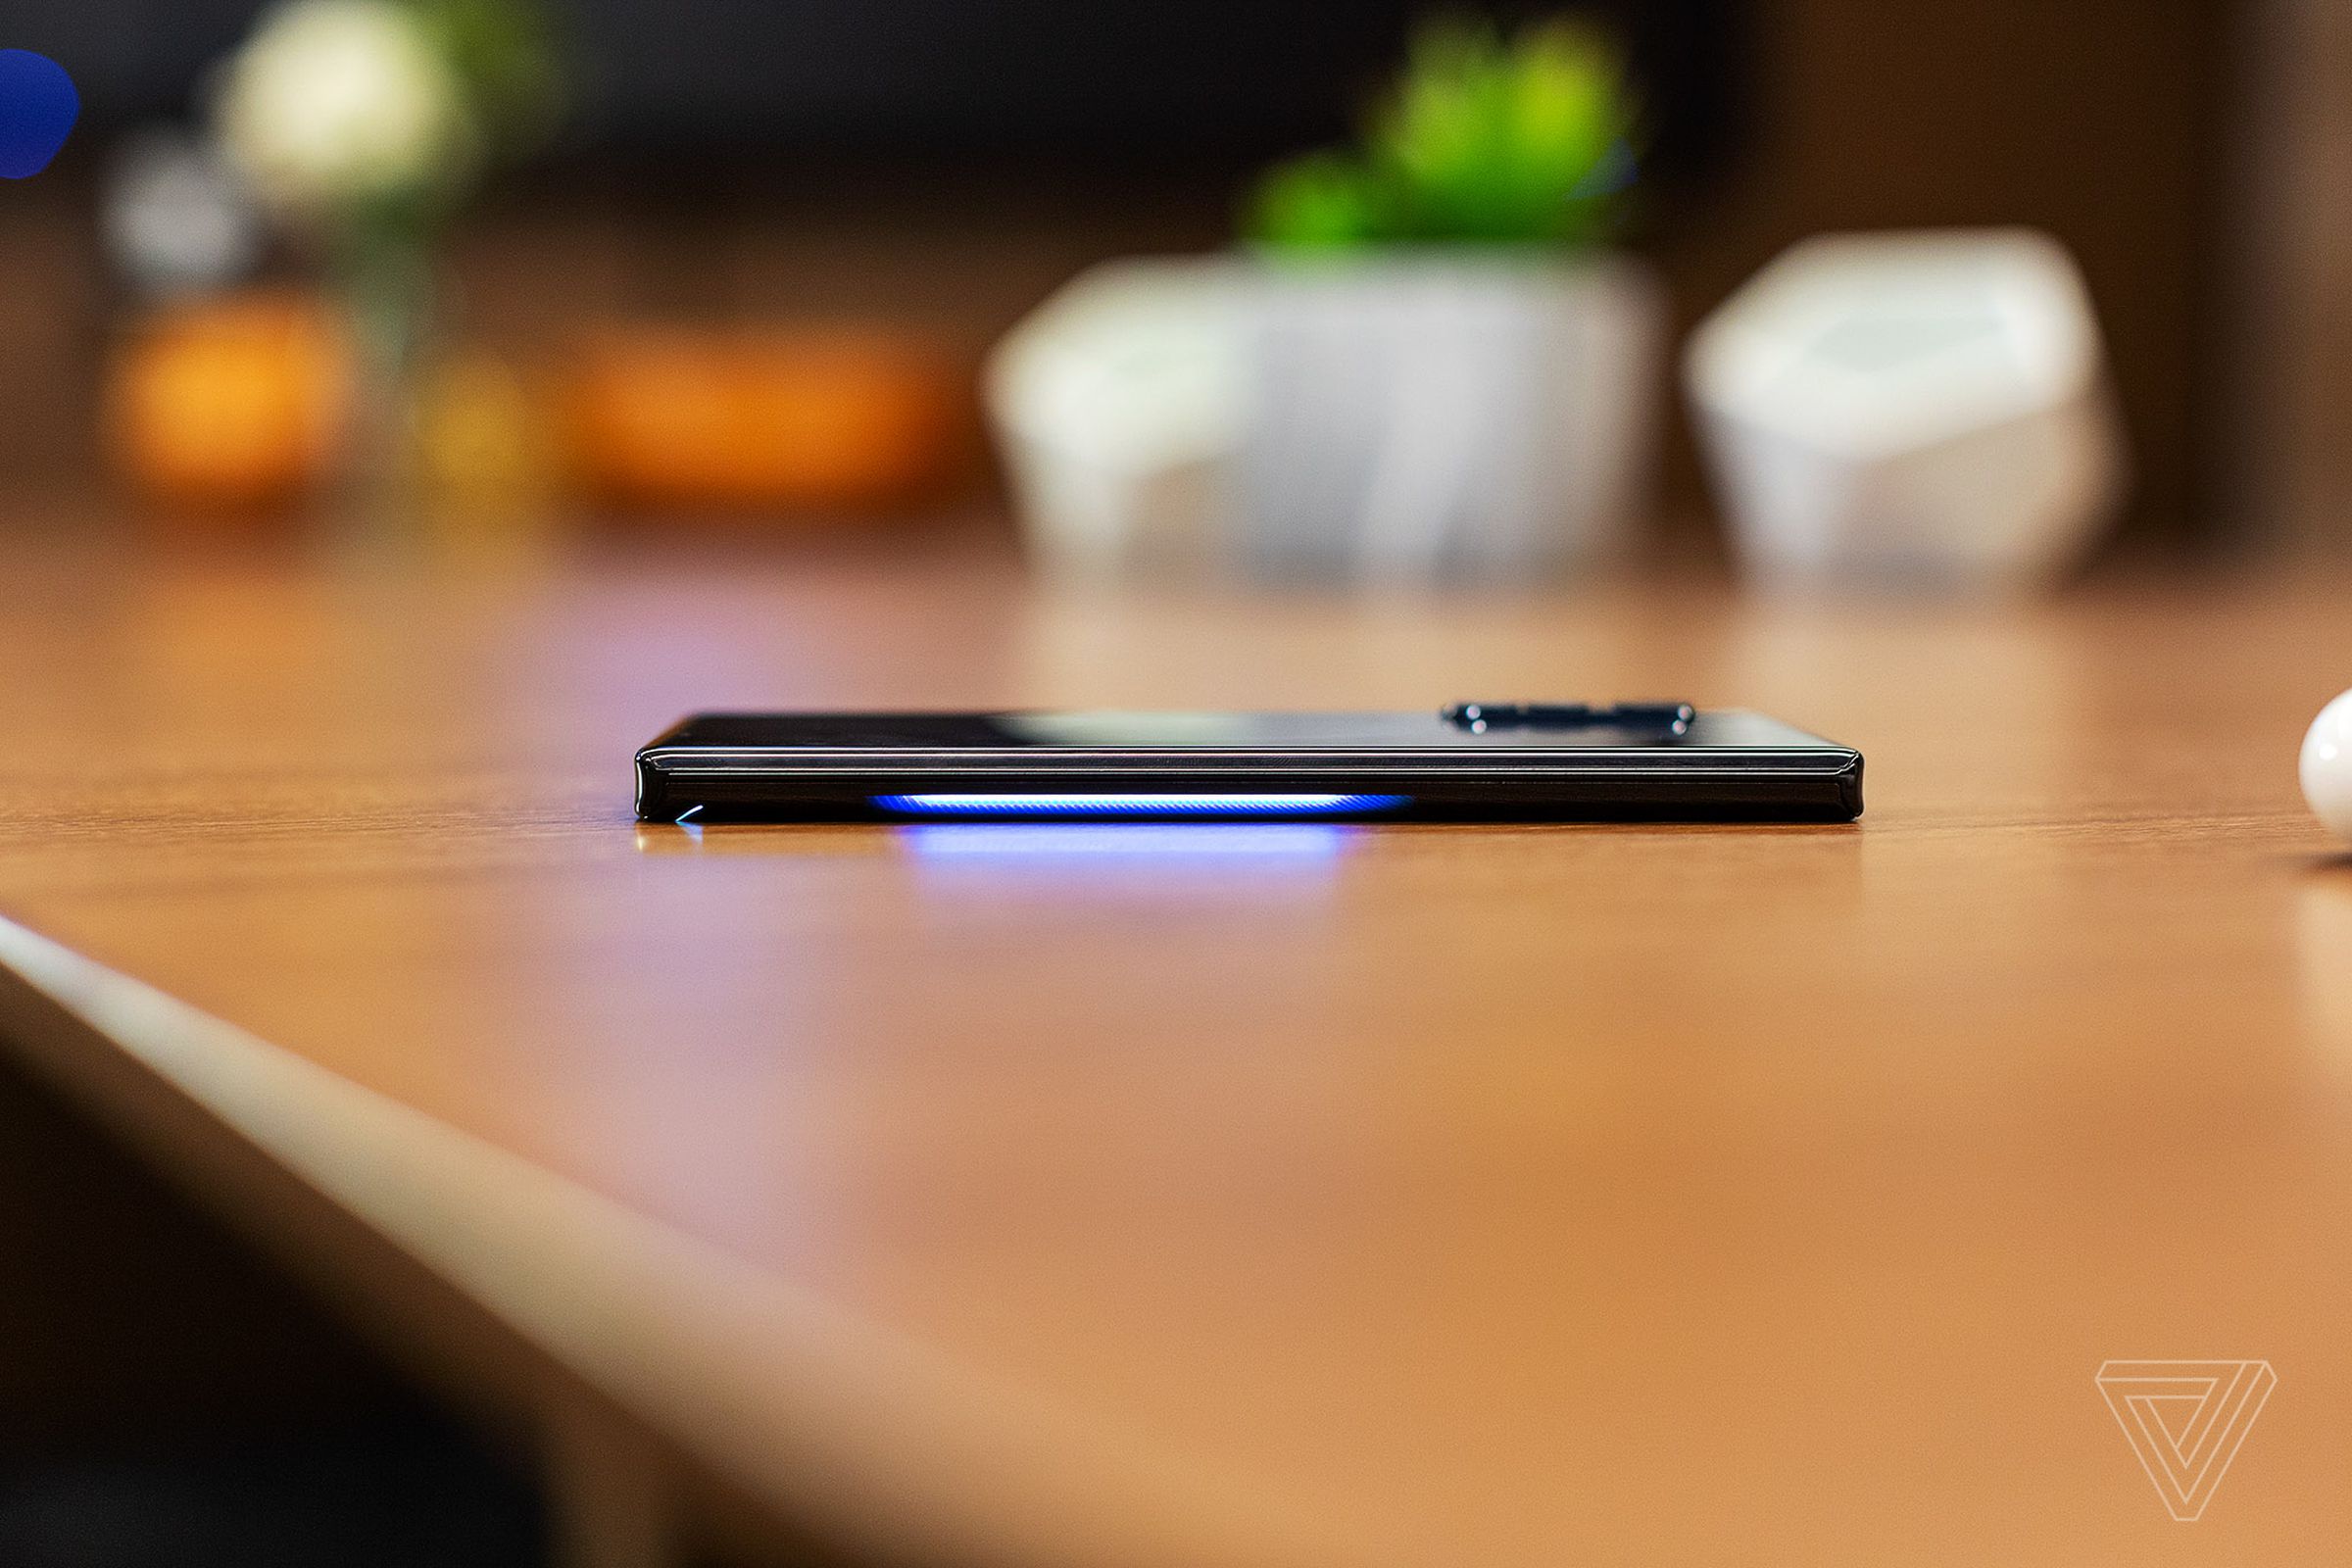 Reverse wireless charging causes the edges of the display to light up to help align your devices